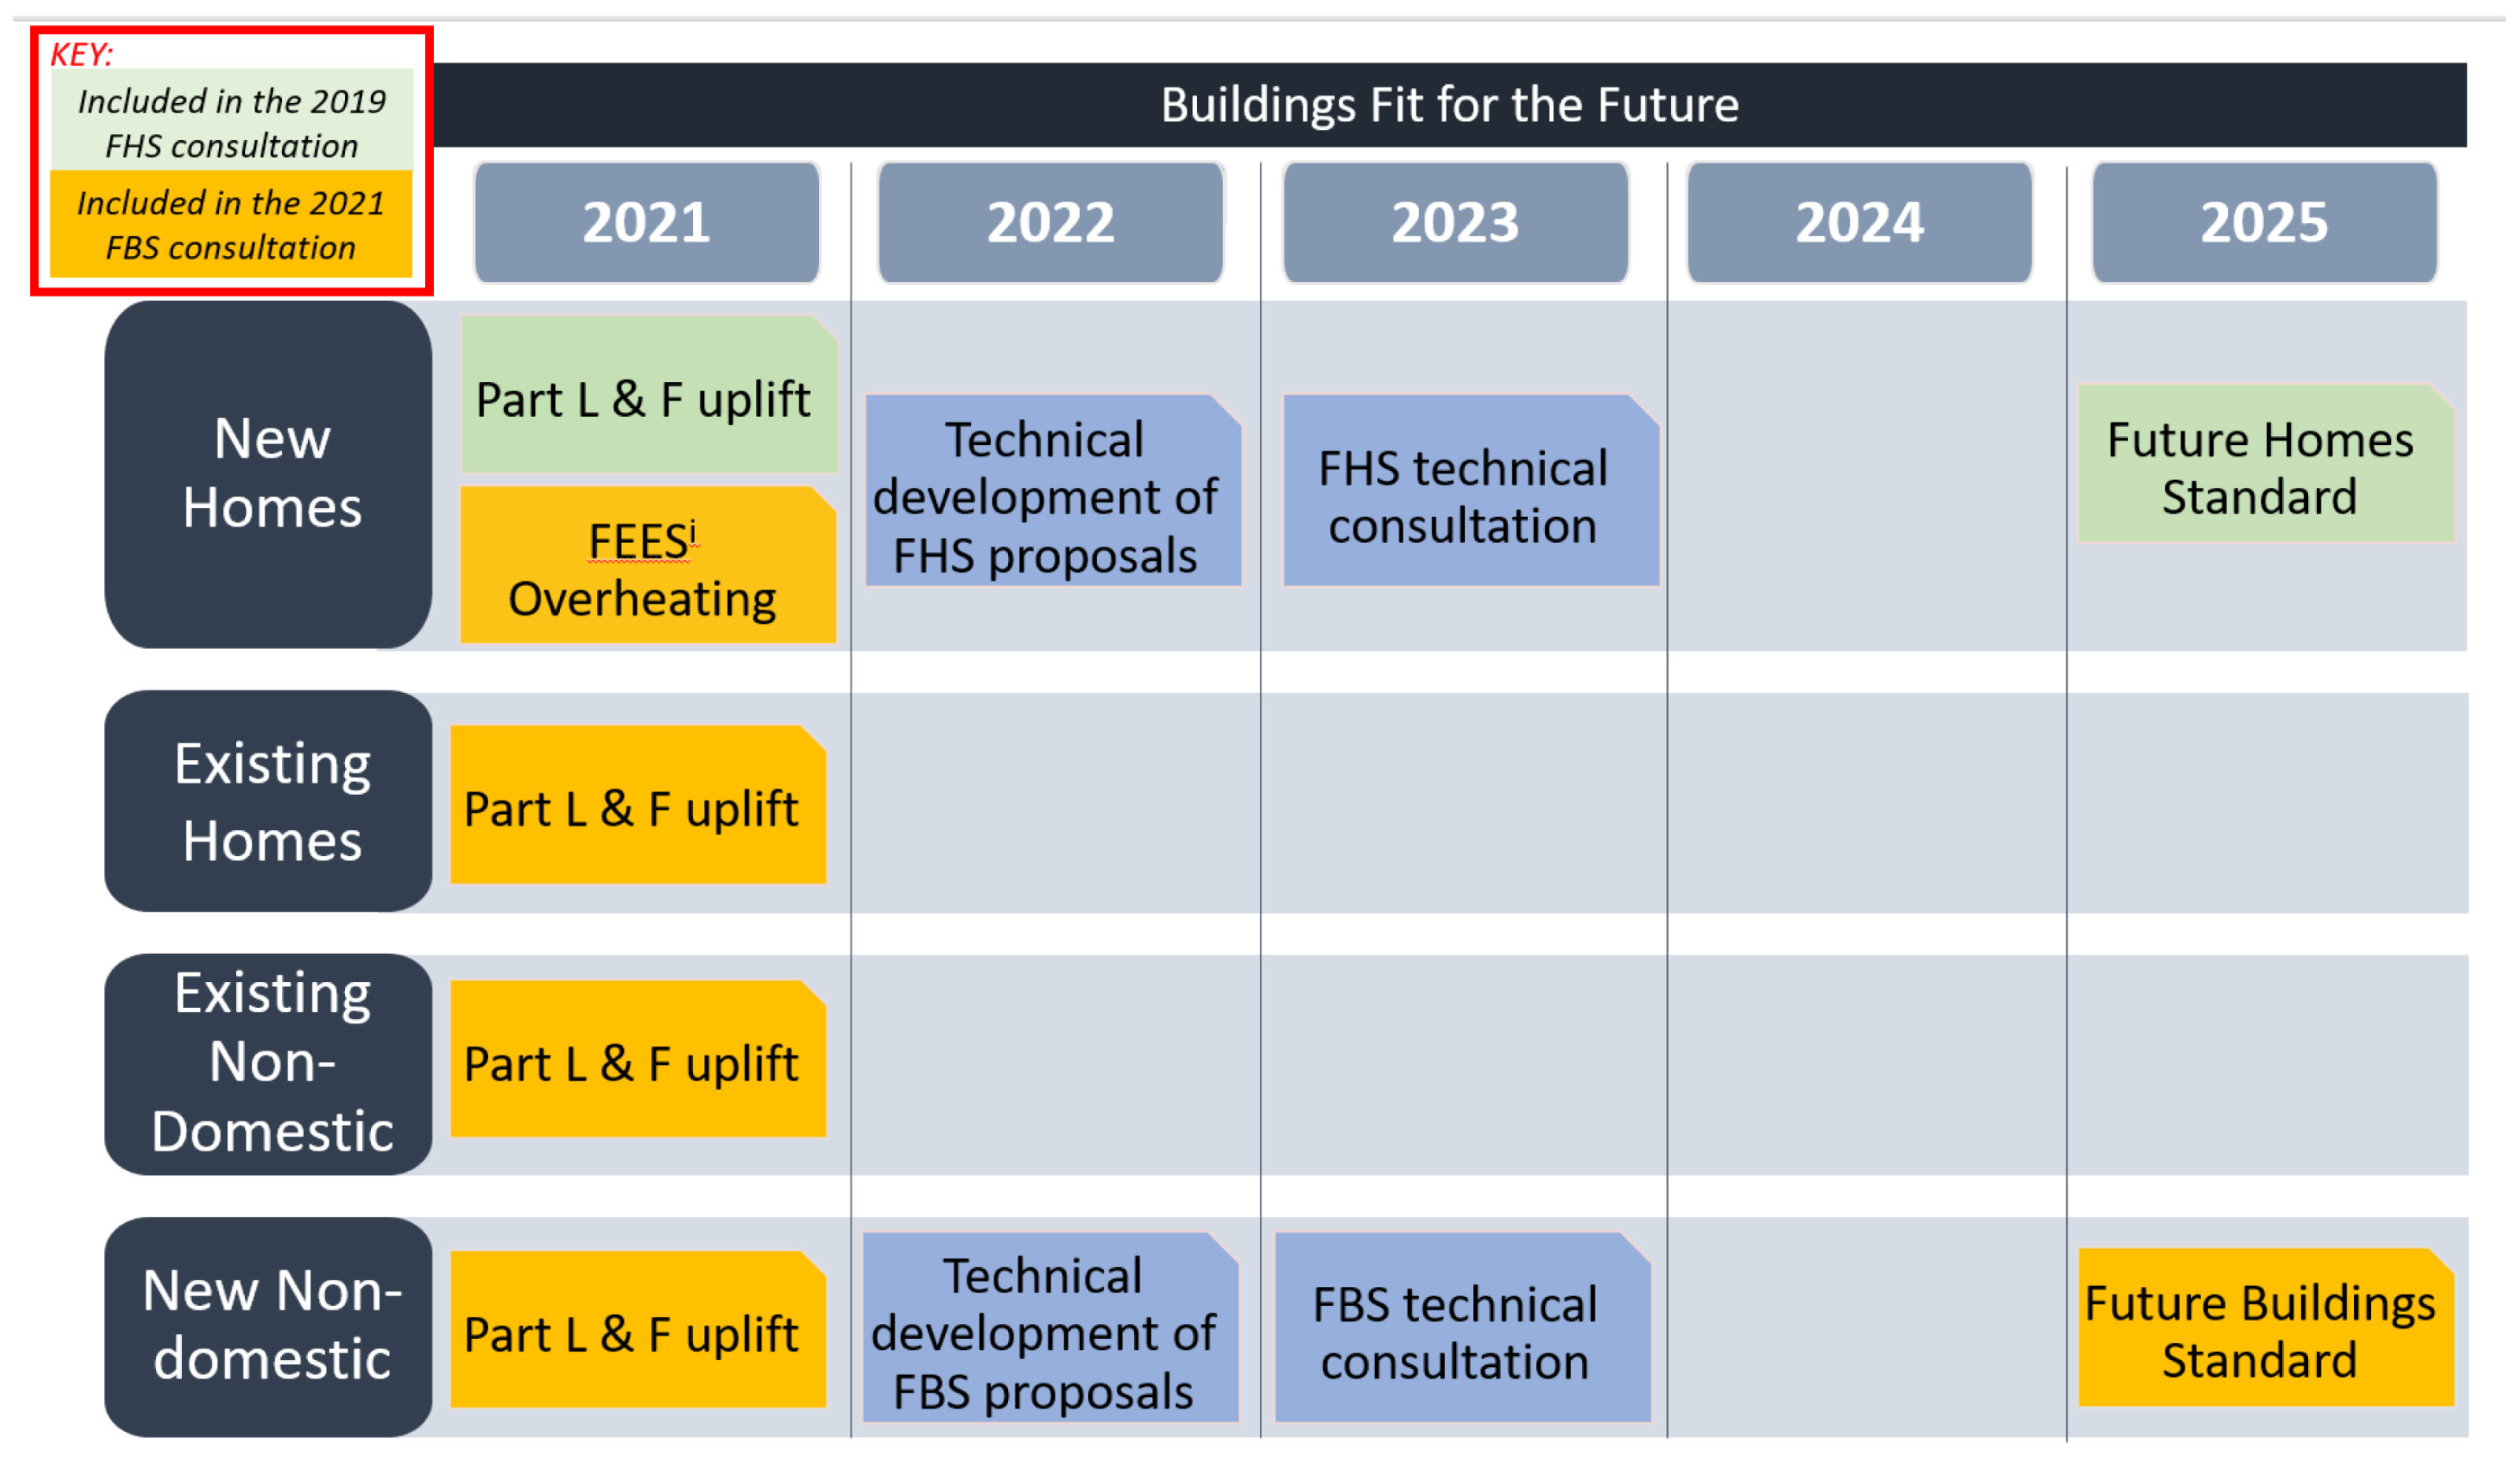 Contents of The Future Buildings Standard